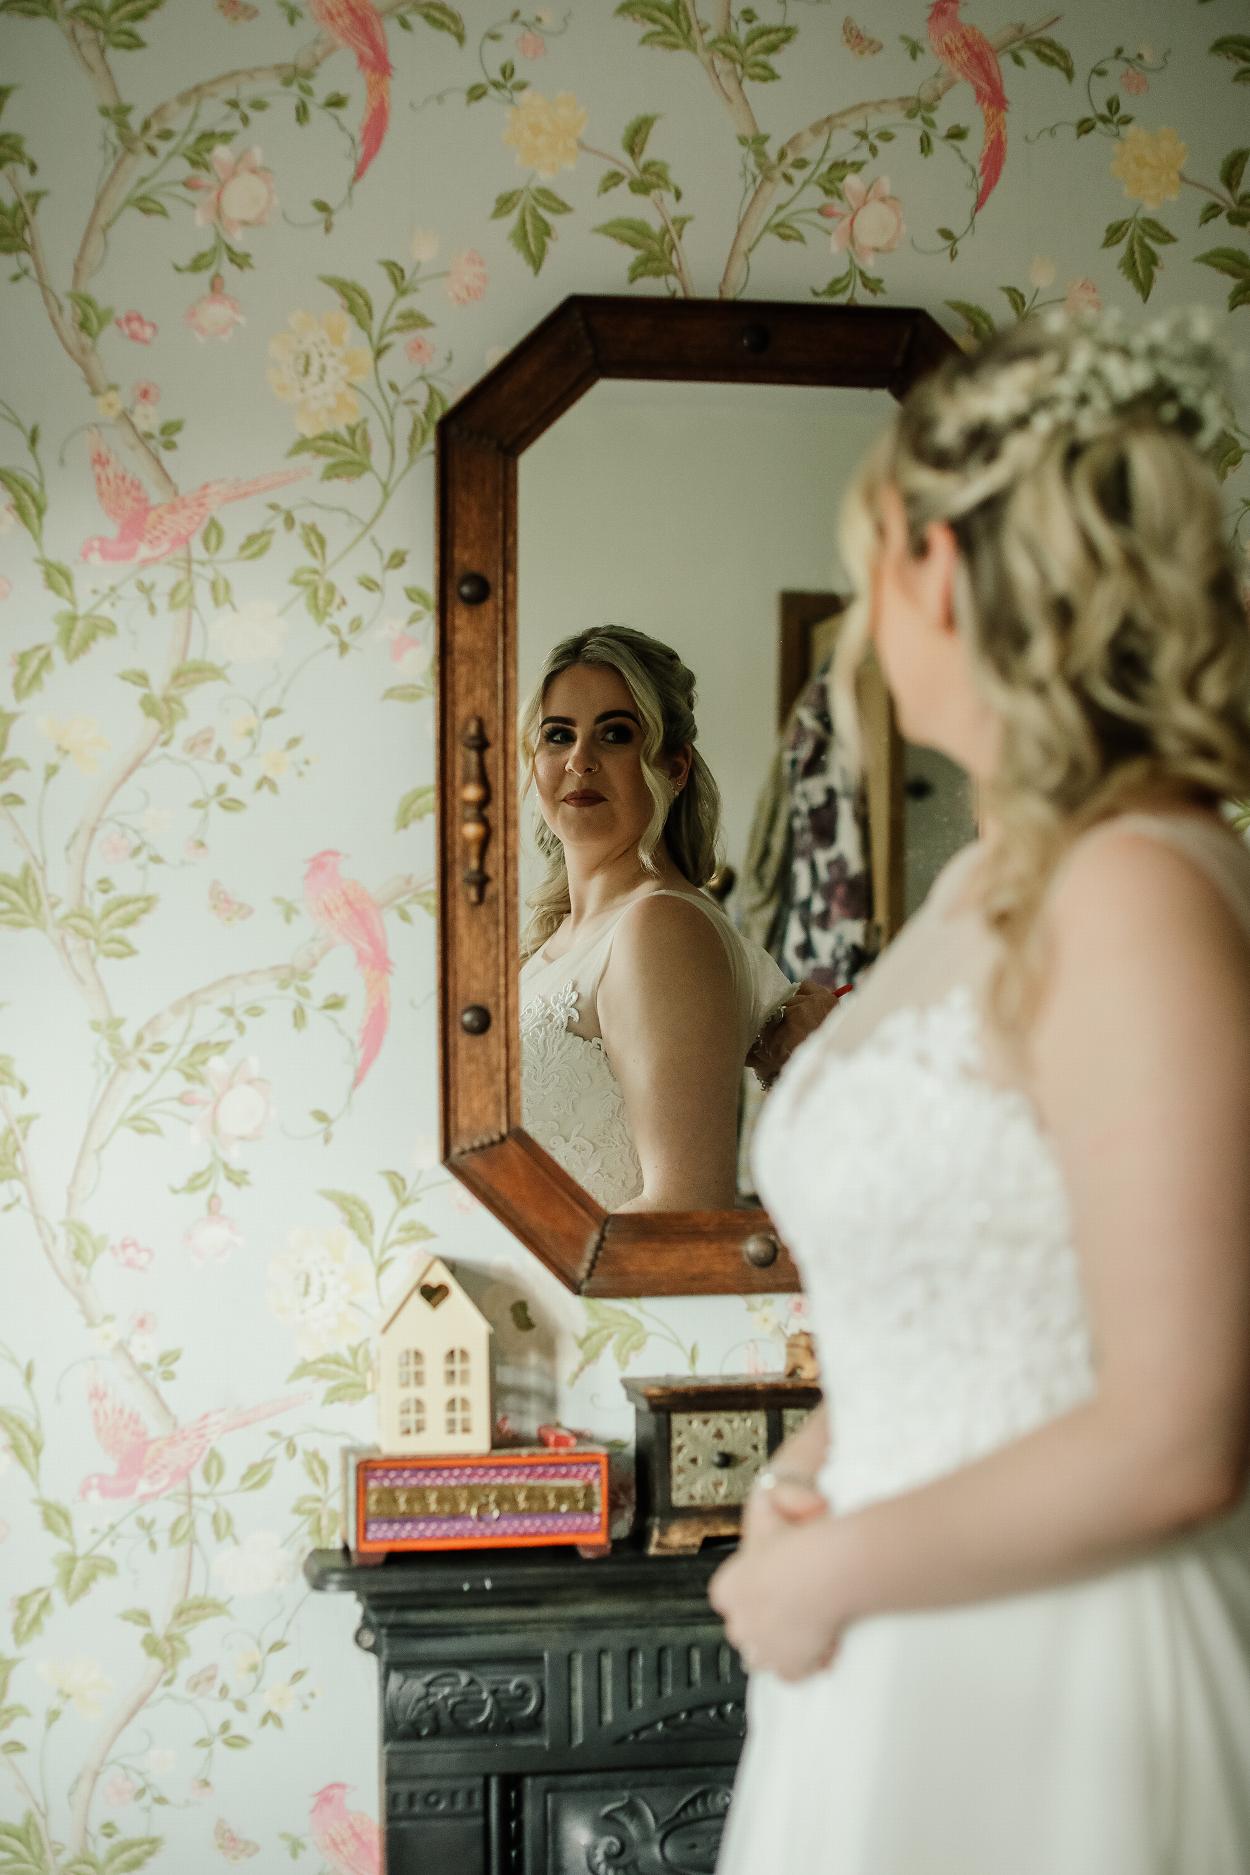 Elsham Hall Bride - Brides Dress Reveal Photography - North Lincolnshire Wedding Photographer - Natural Documentary Style Wedding Photography